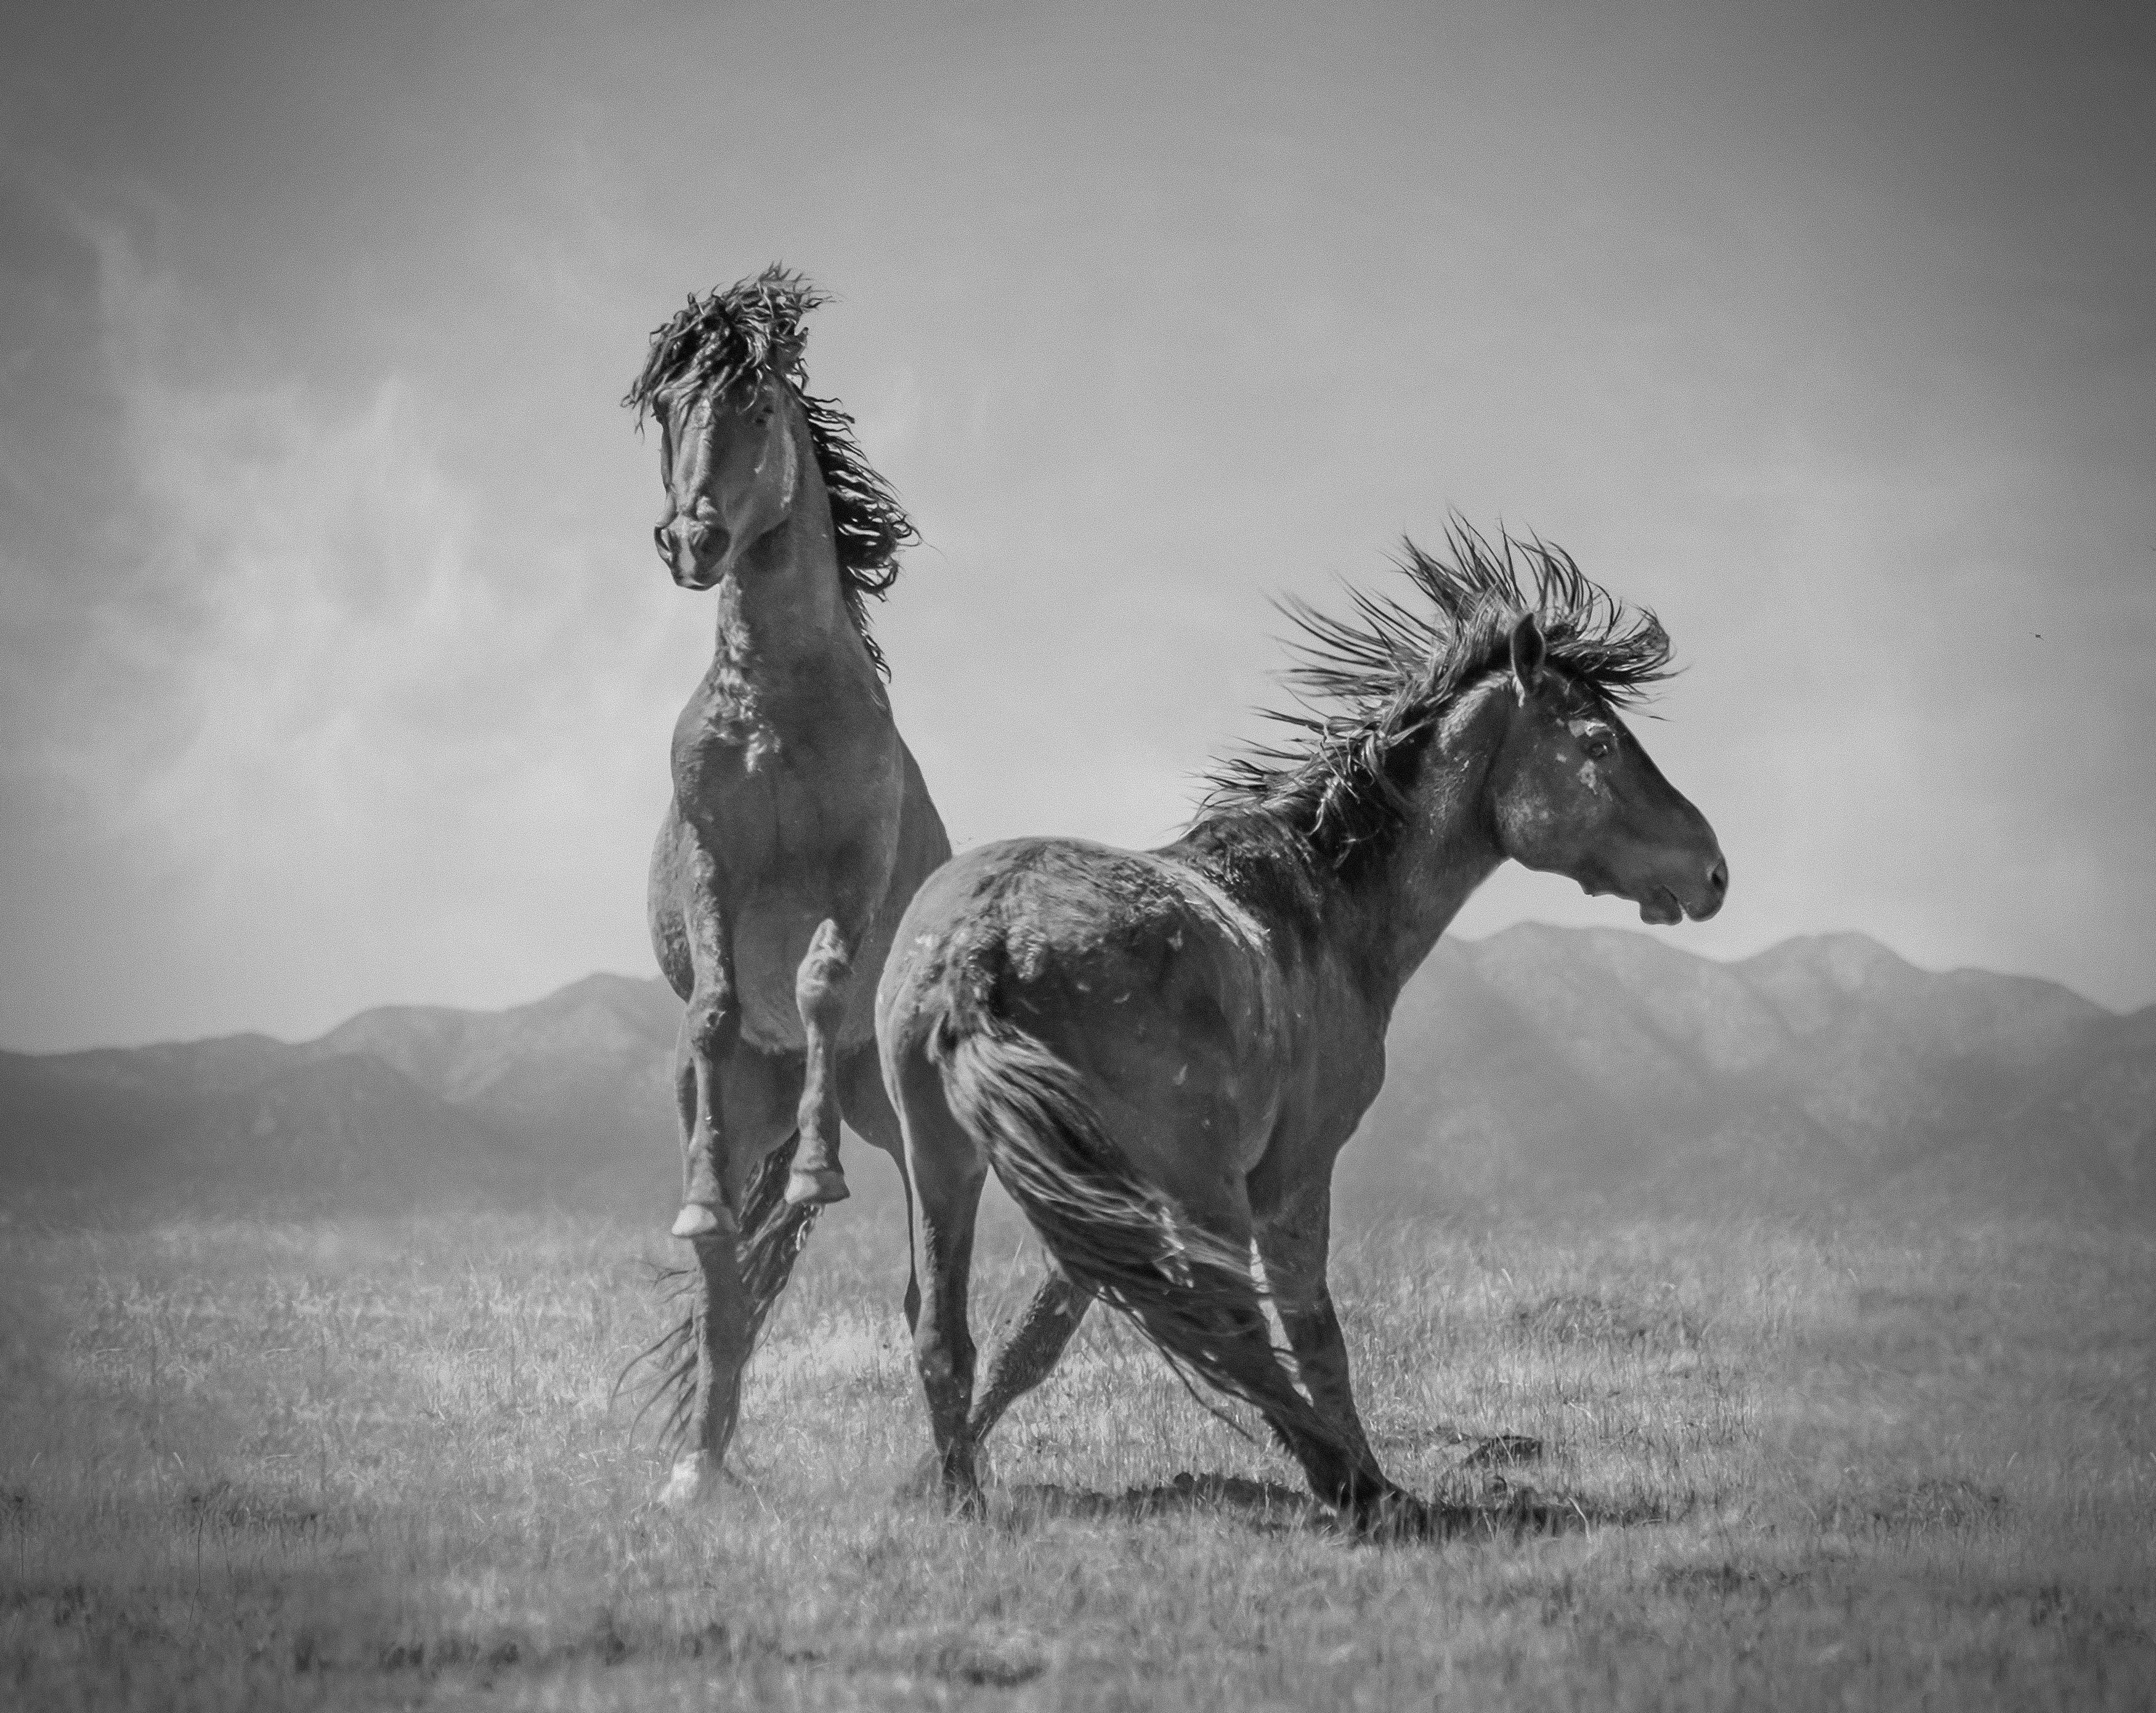 Shane Russeck Black and White Photograph - "Wonder Horses" 40x50 - Black & White Photography, Wild Horses Mustangs Unsinged